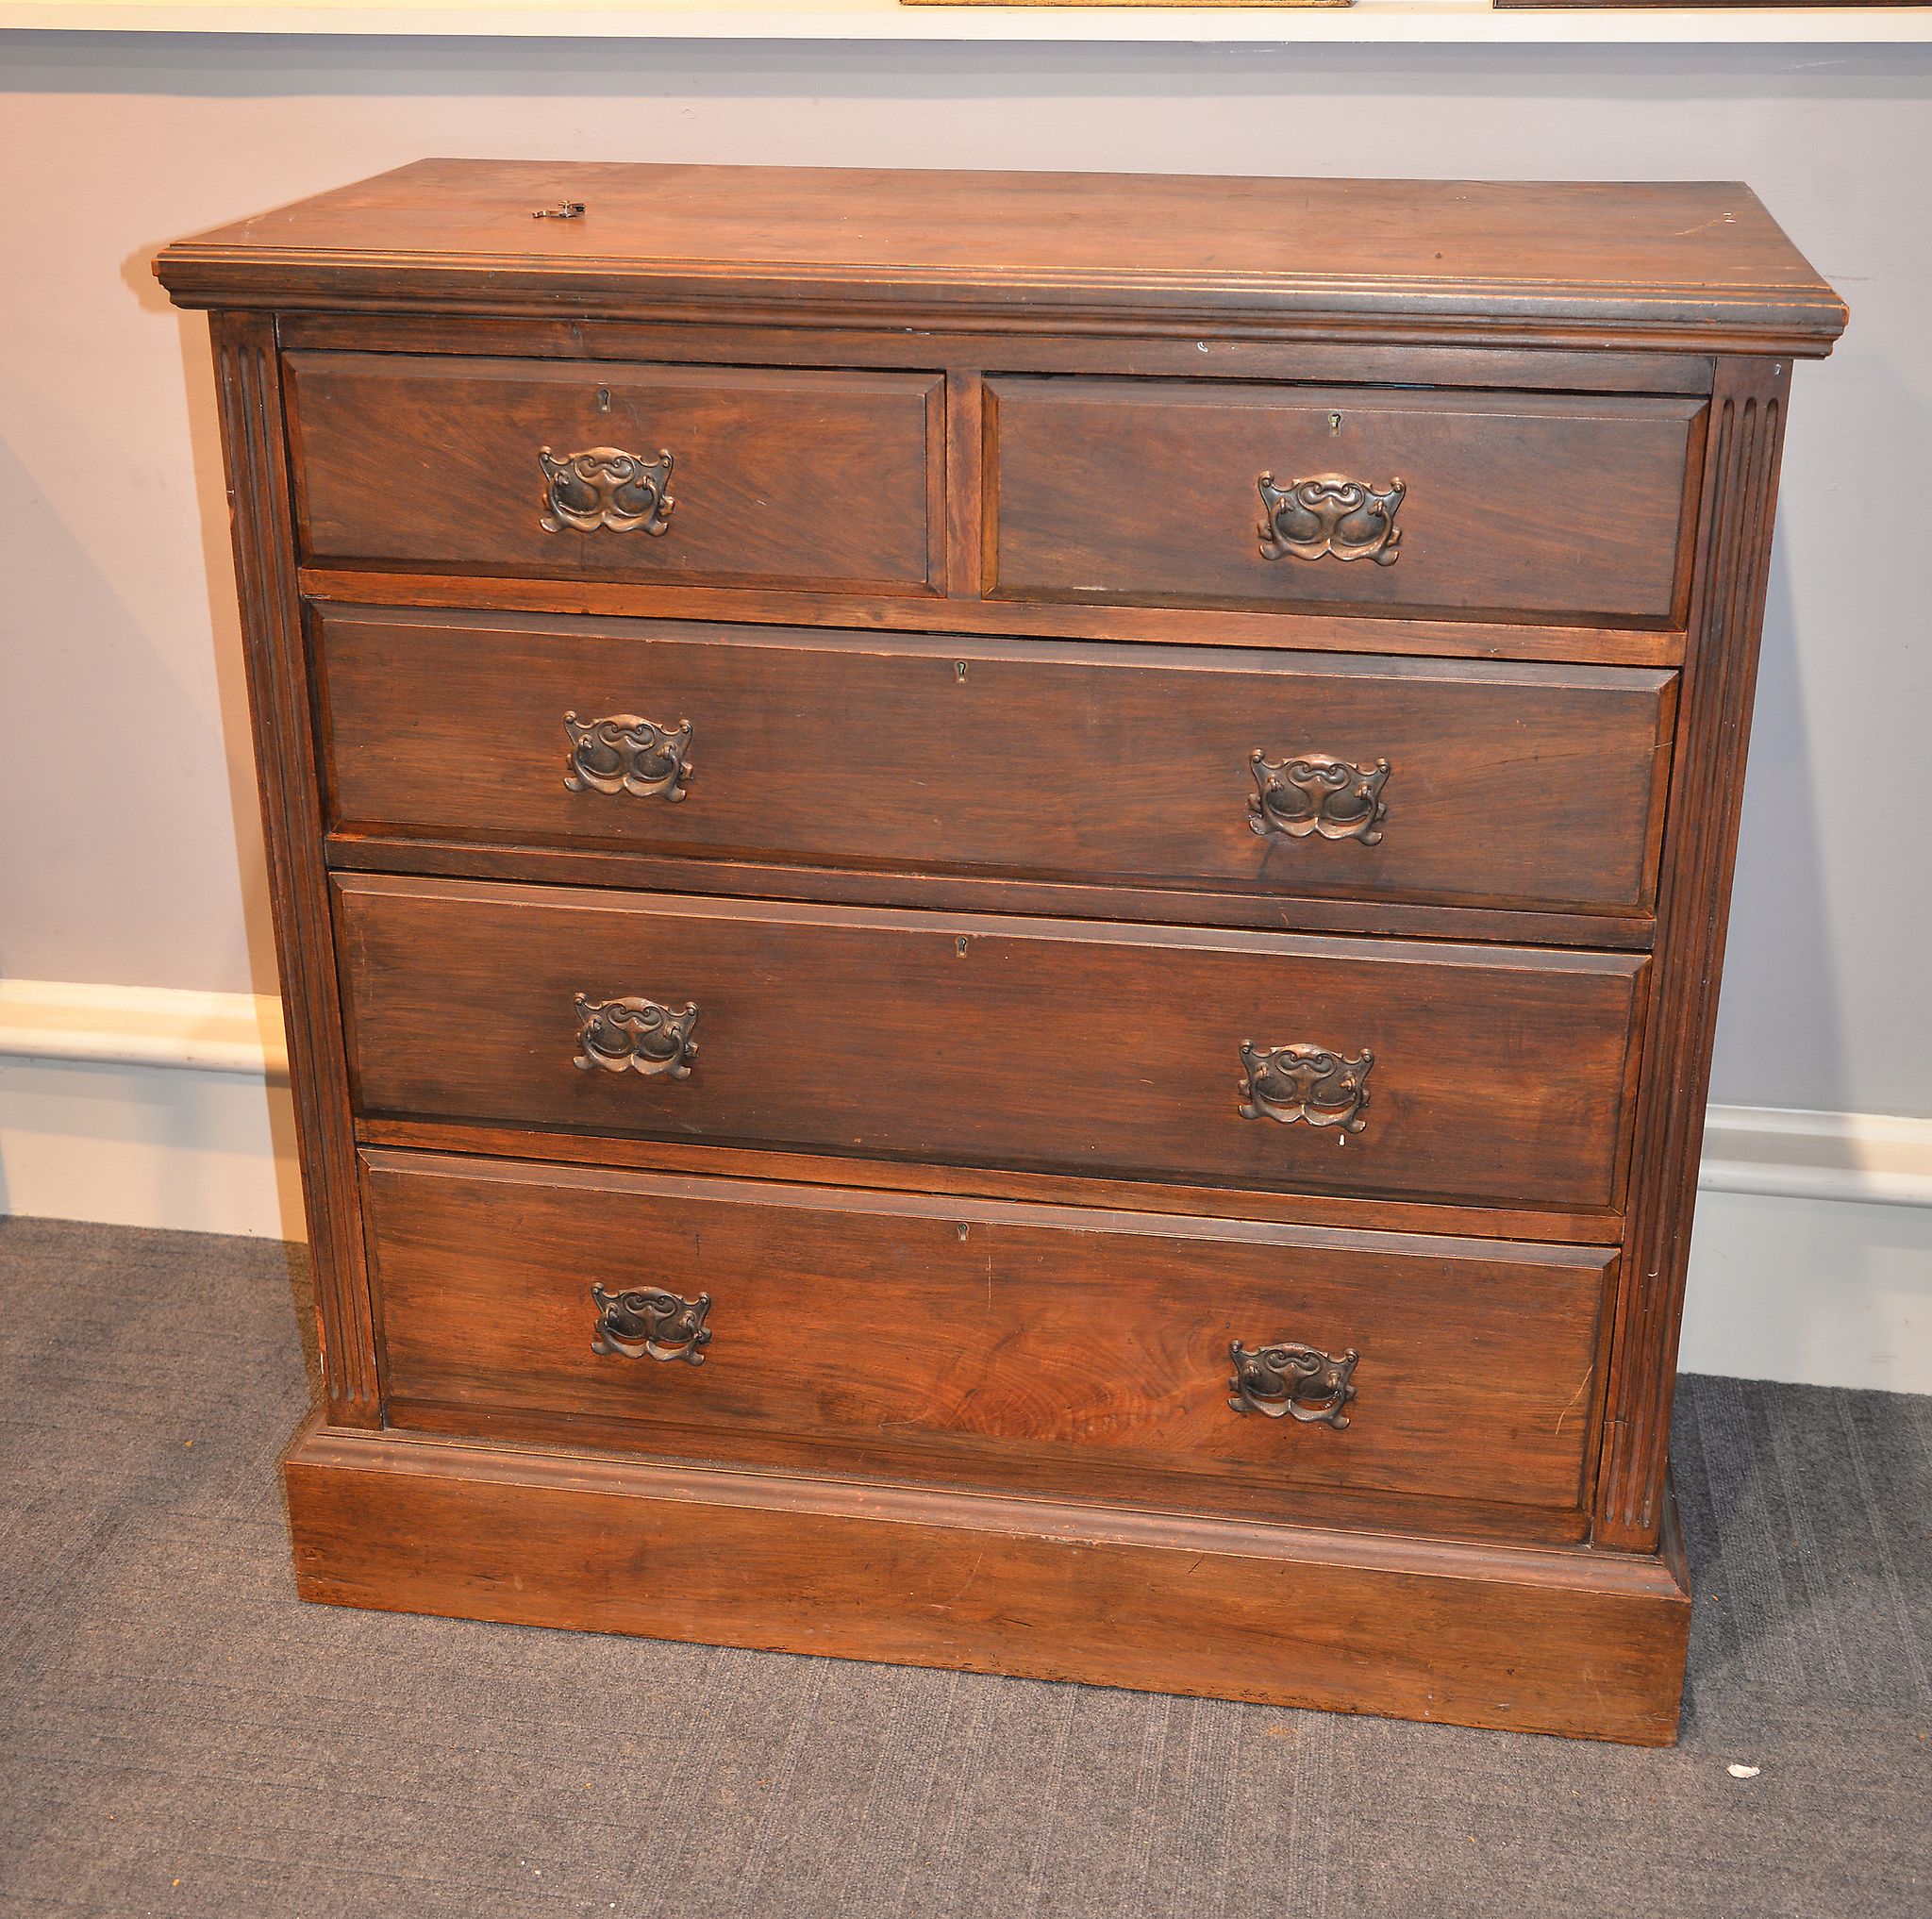 An Edwardian walnut chest of drawers, with two short and three long